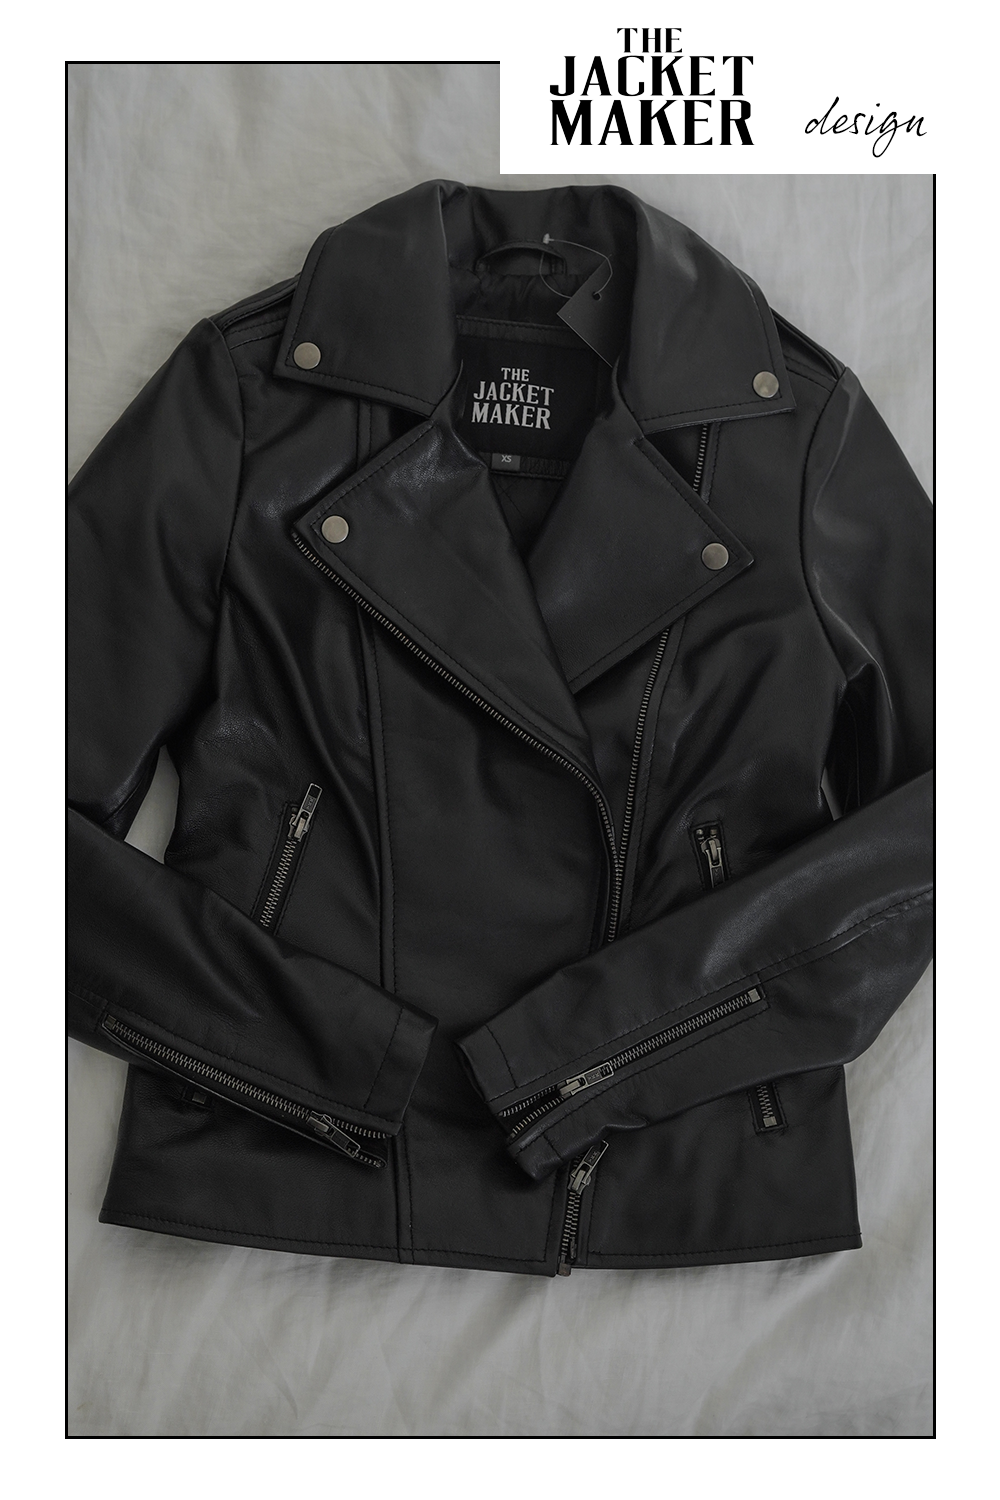  leather jacket review, womens leather jackets, womens biker jackets, black leather jackets, leather jackets under 300, real leather jacket for less, best leather jackets for women 